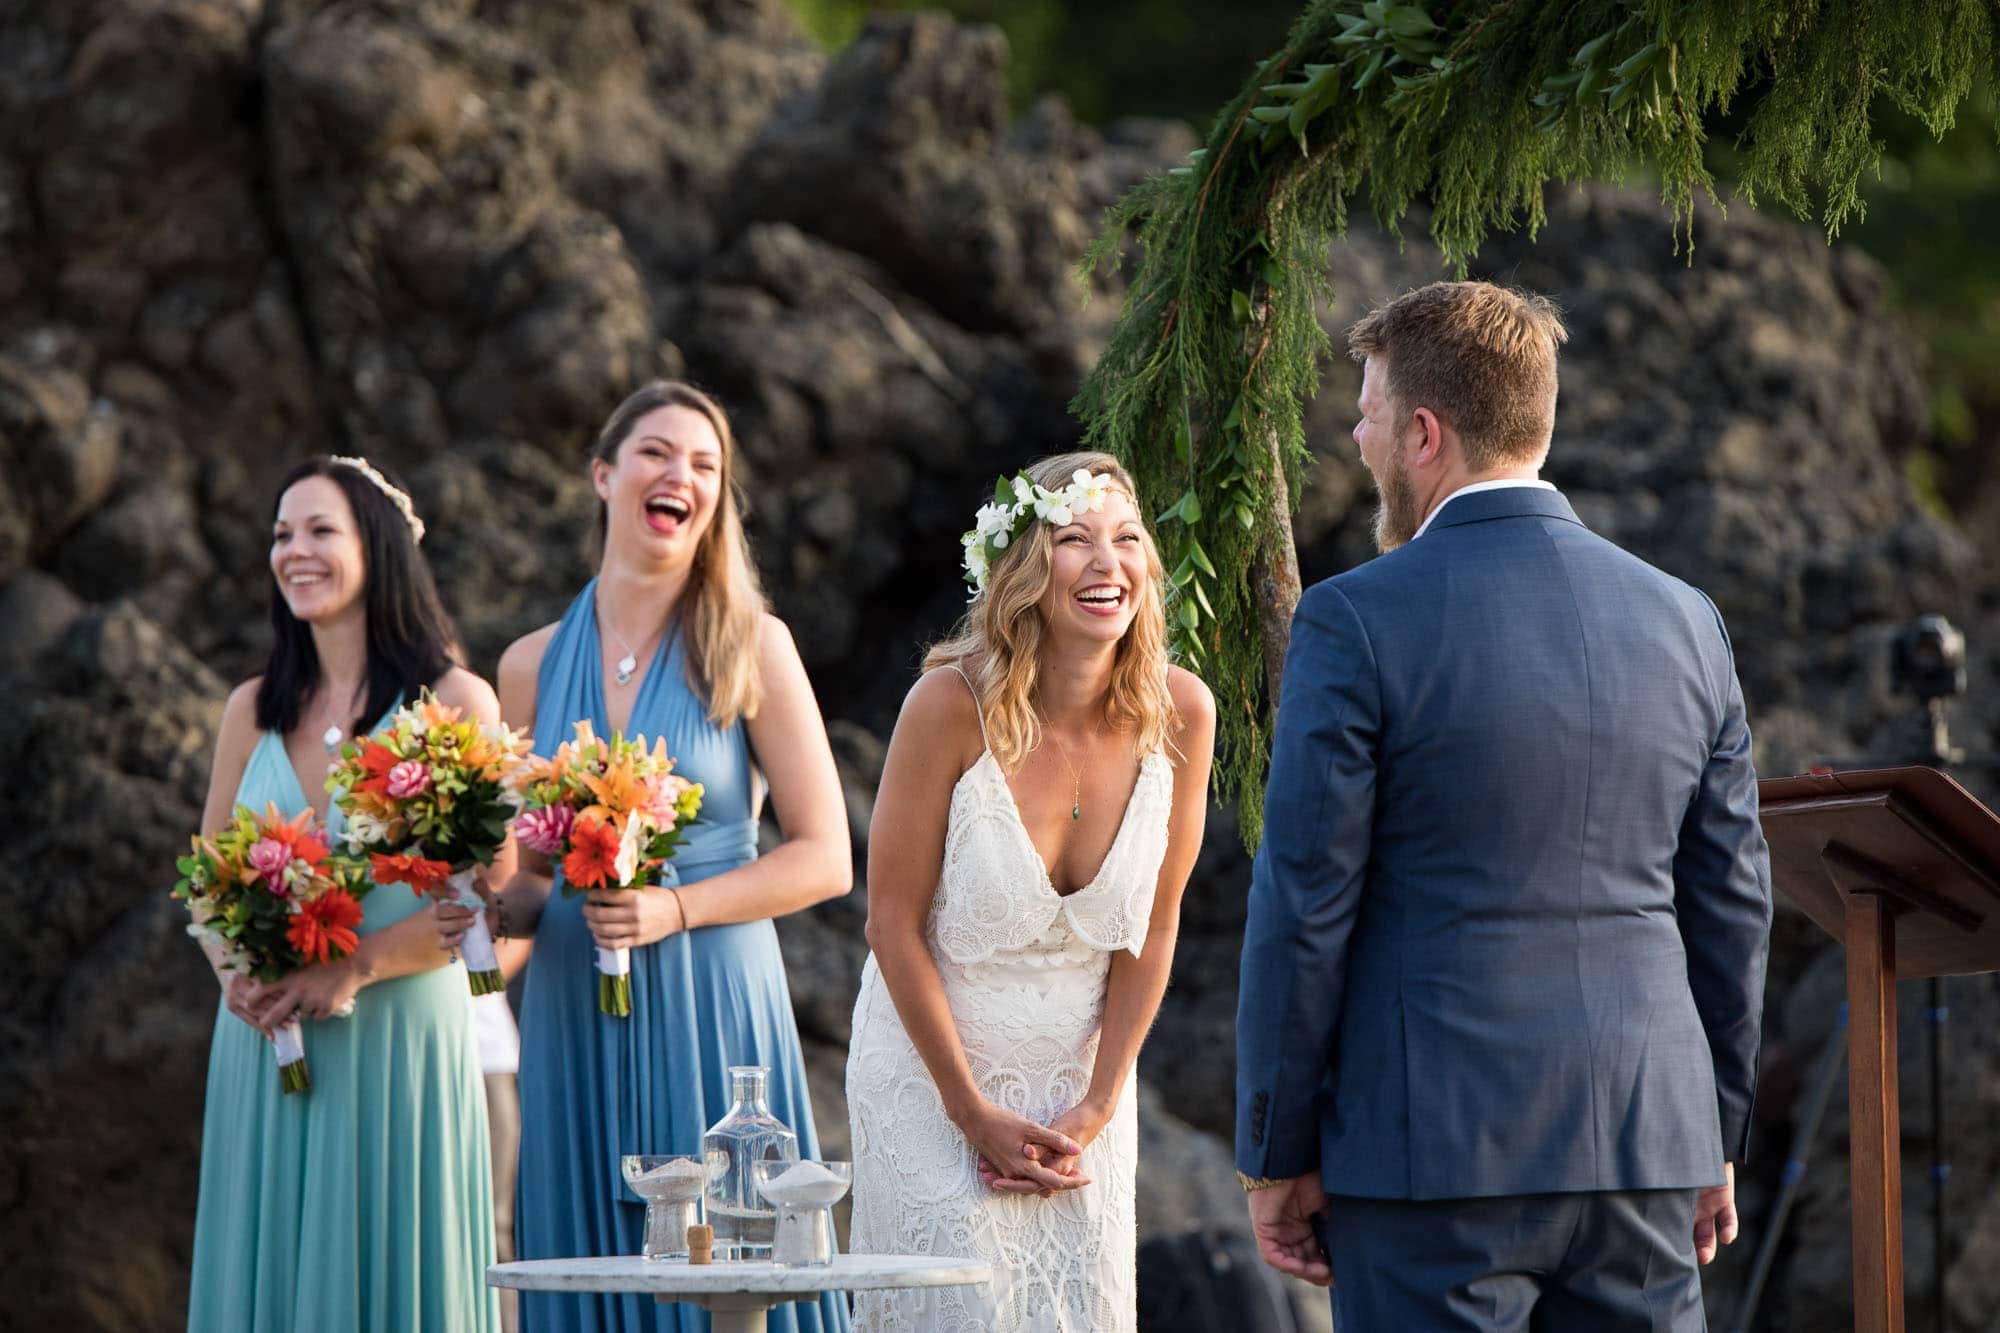 Laughter during a joyful wedding ceremony